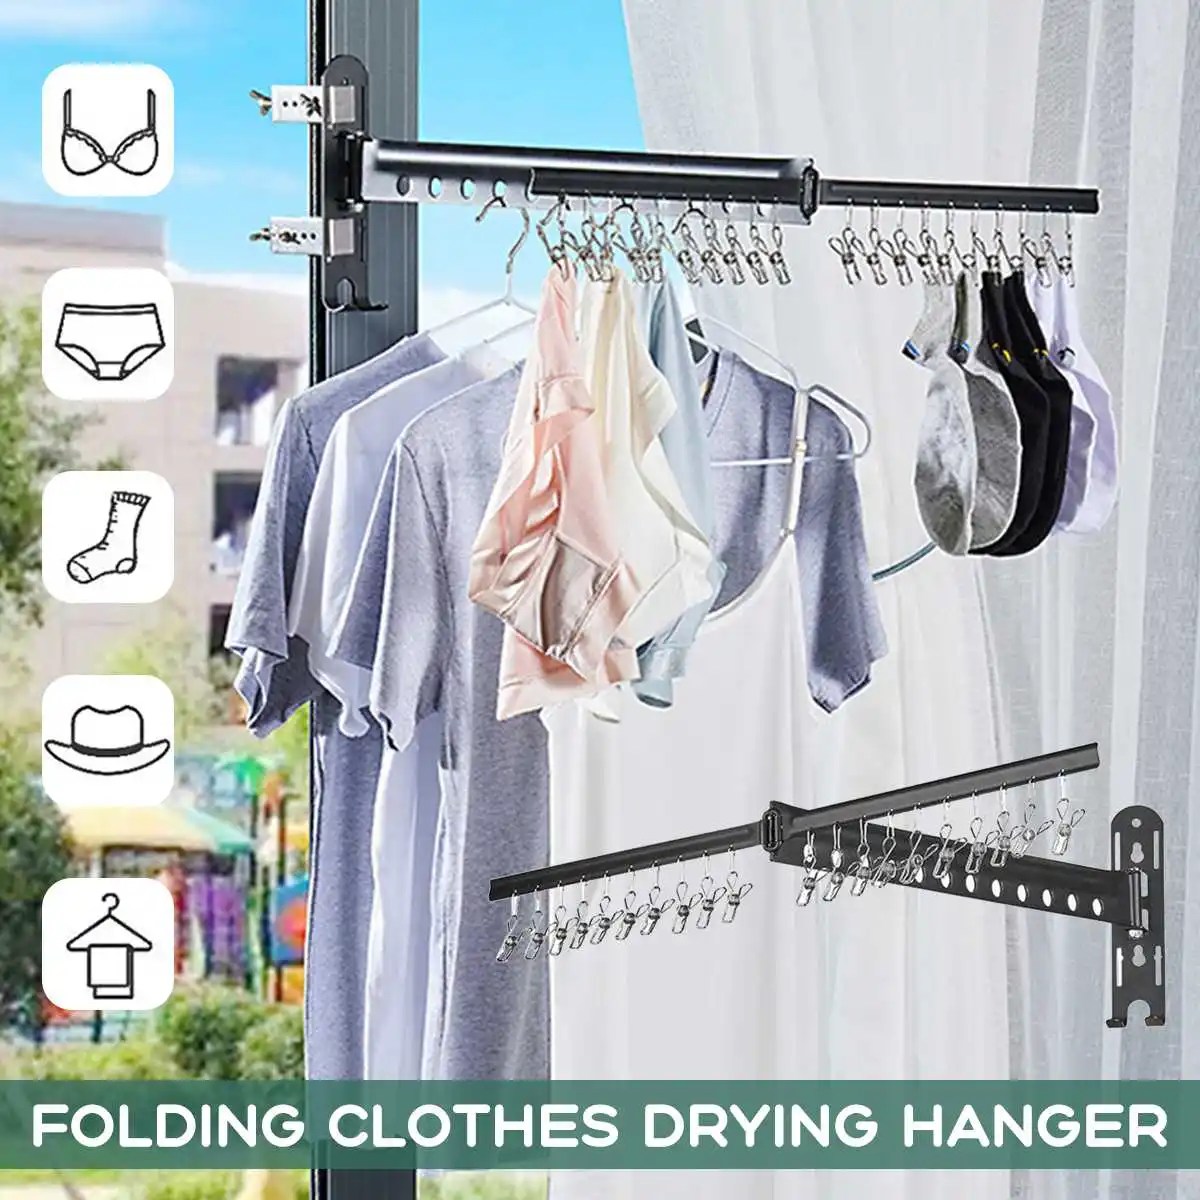 Clothes Hanger,180 Degrees Rotating Wall Folding Clothes Hanger Wall Mounted Clothes Hanger Rail Folding Clothes Hanging Rack Laundry Rack Adjustable Clothes Drying Rack for Bathroom Bedroom Balcony 